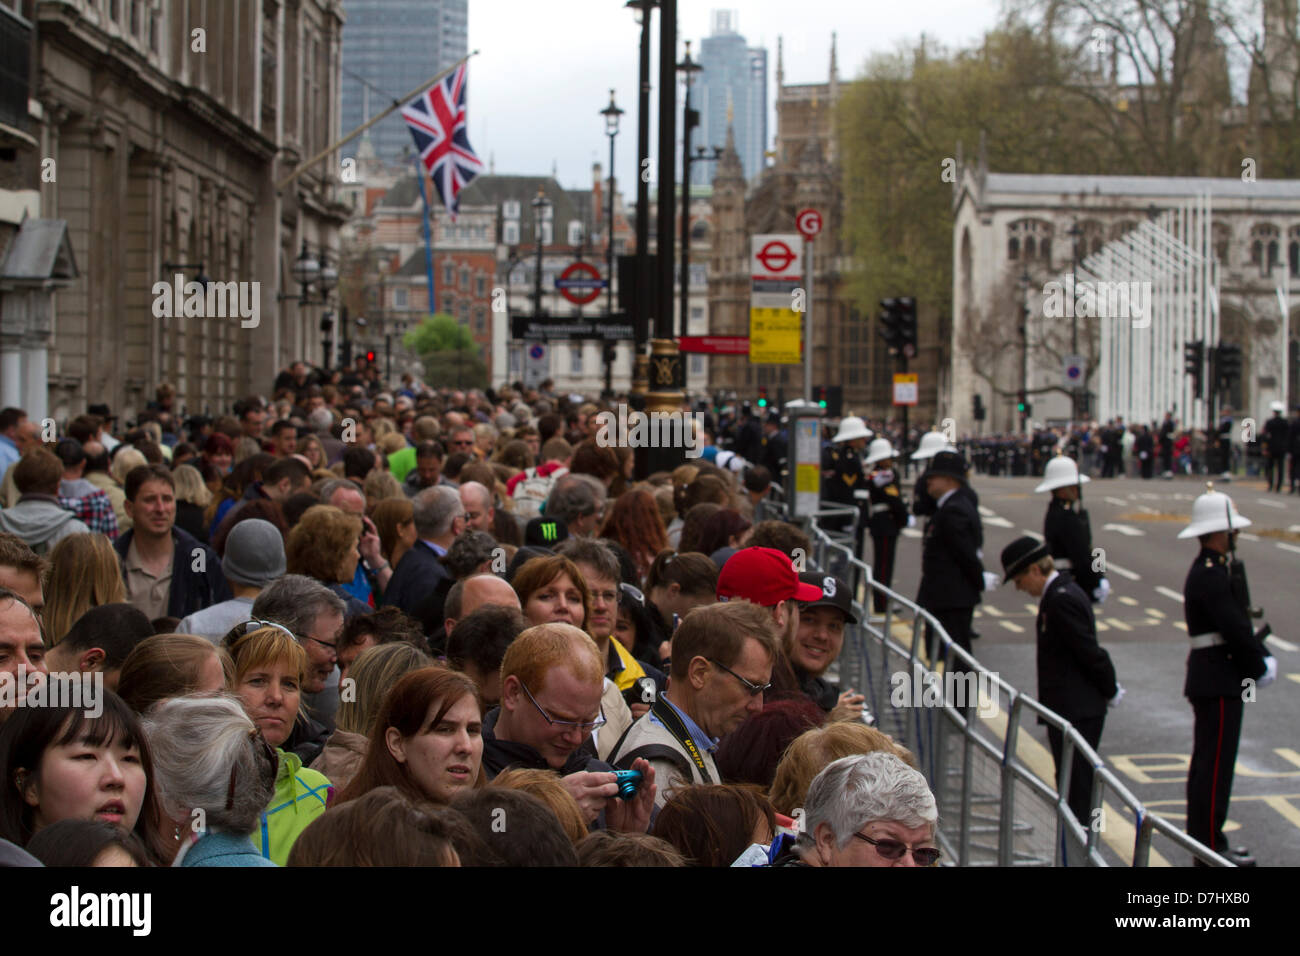 Westminster London, UK. 8th May 2013.  Large crowds gather in Whitehall to see Queen's procession for the opening  of Parliament at the House of Lords.  The Queen will deliver a speech which will set out the government's agenda for 2013/14 with 19 draft bills. Credit: Amer Ghazzal/Alamy Live News Stock Photo